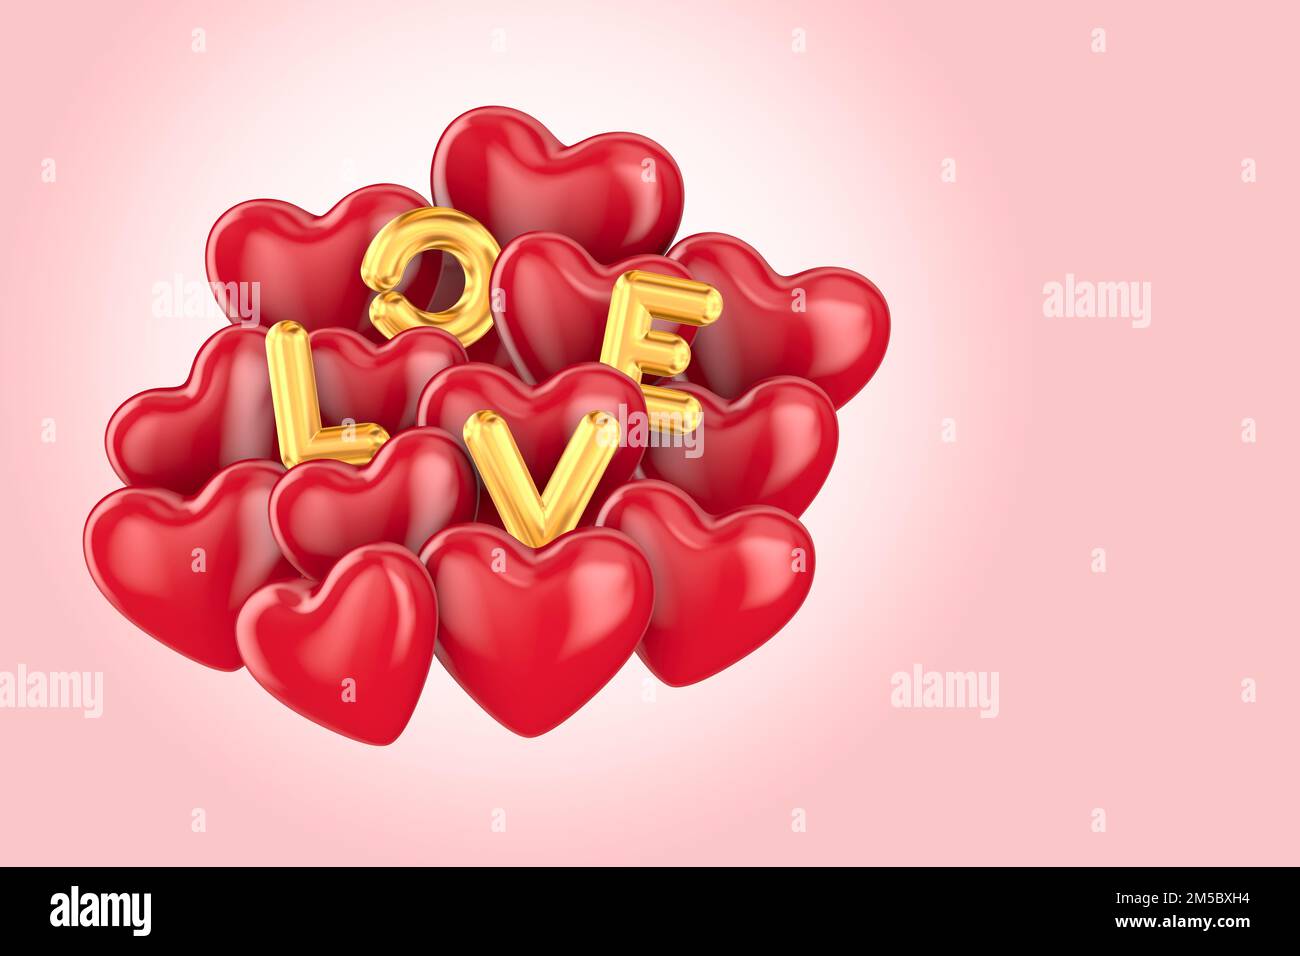 hearts on pink background. Isolated 3D illustration Stock Photo